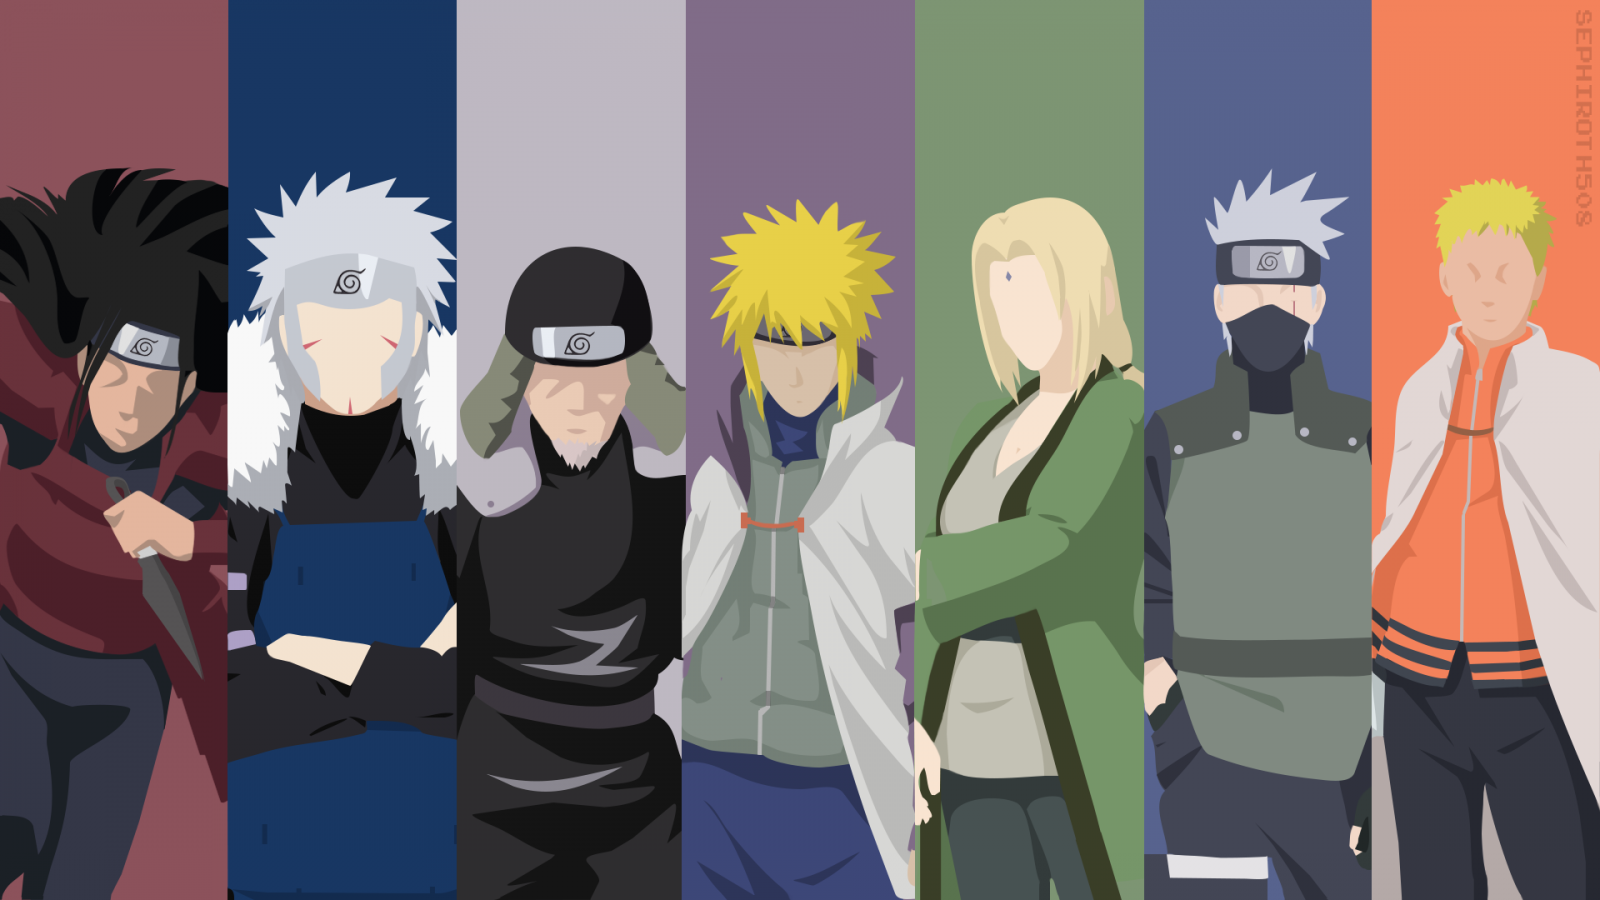 Free download The Hokage Naruto Shippuden Minimalist by Sephiroth508 [1920x1080] for your Desktop, Mobile & Tablet. Explore Naruto Shippuden Wallpaper Hokage. Naruto Shippuden Wallpaper Hokage, Hokage Naruto Wallpaper, Naruto Shippuden Wallpaper